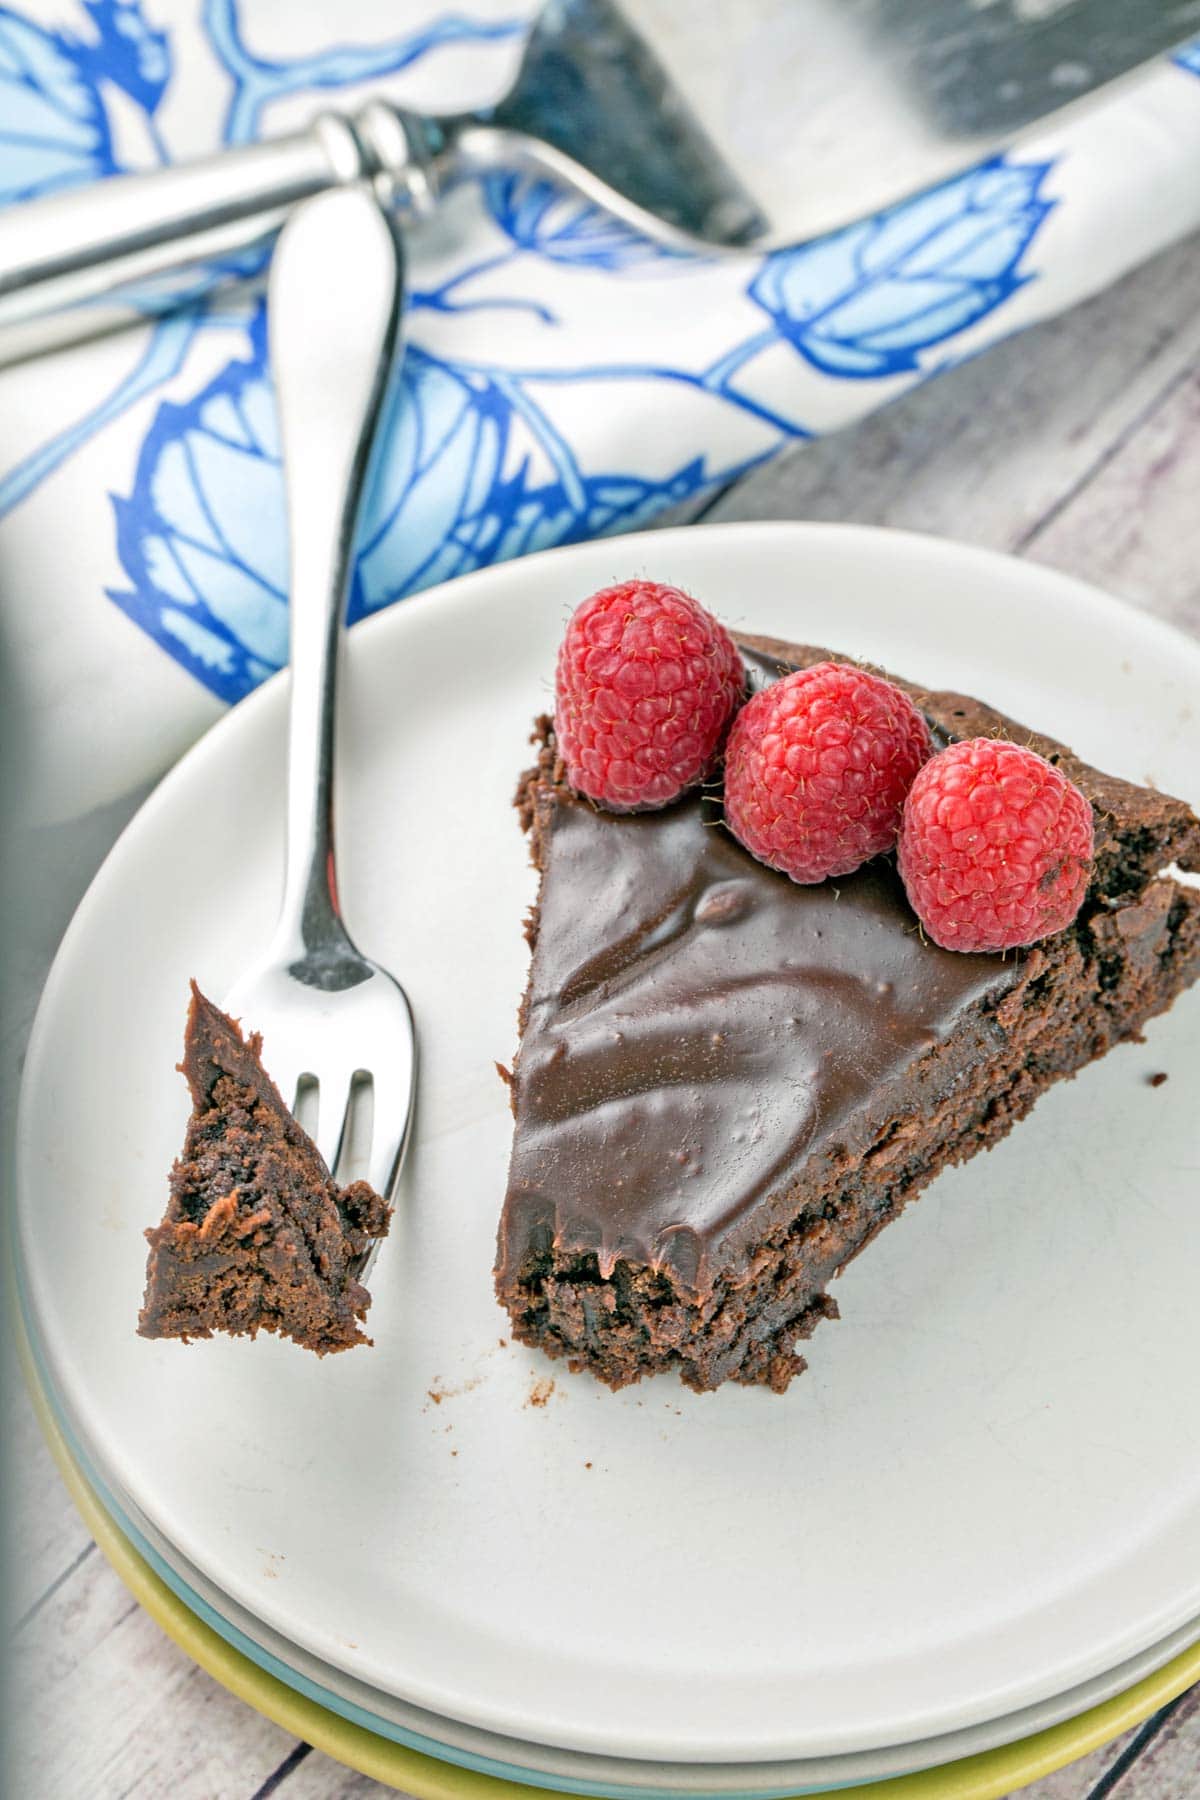 one slice of cake with chocolate ganache and three raspberries on a dessert plate 